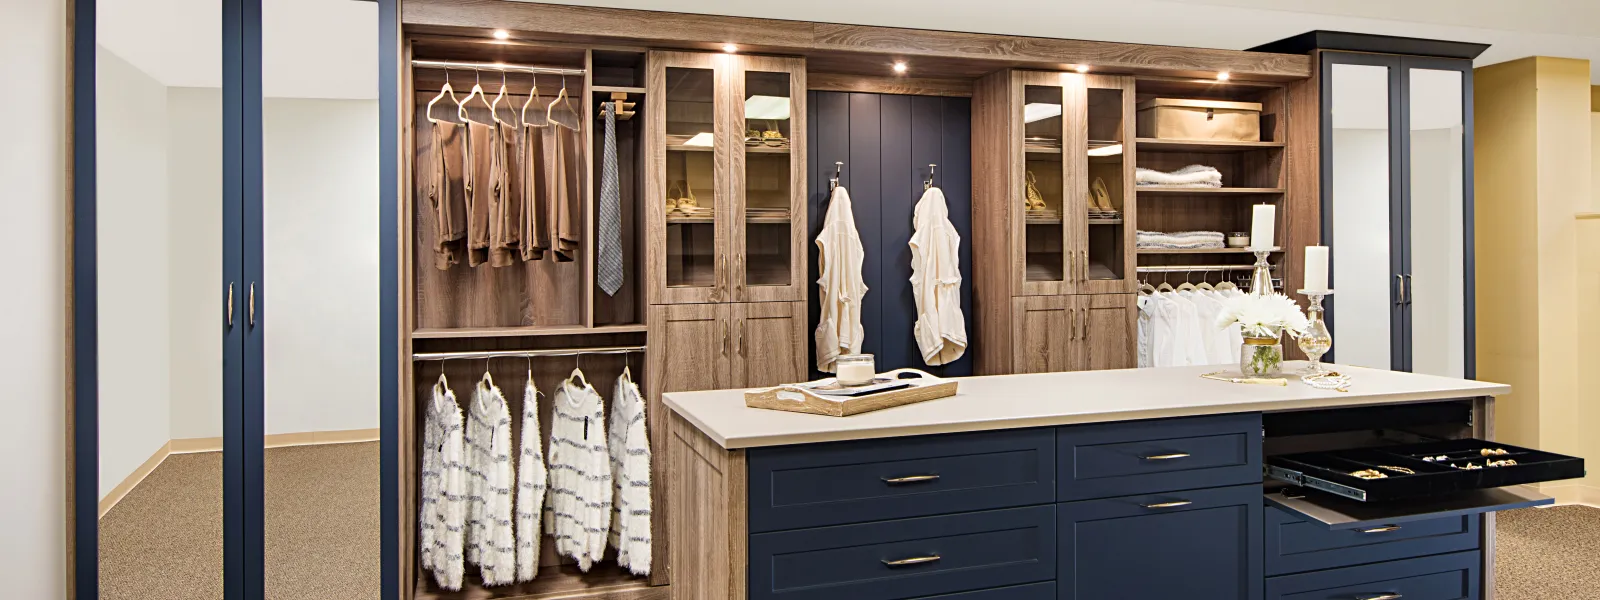 Top Features for Laundry Areas and Mudrooms